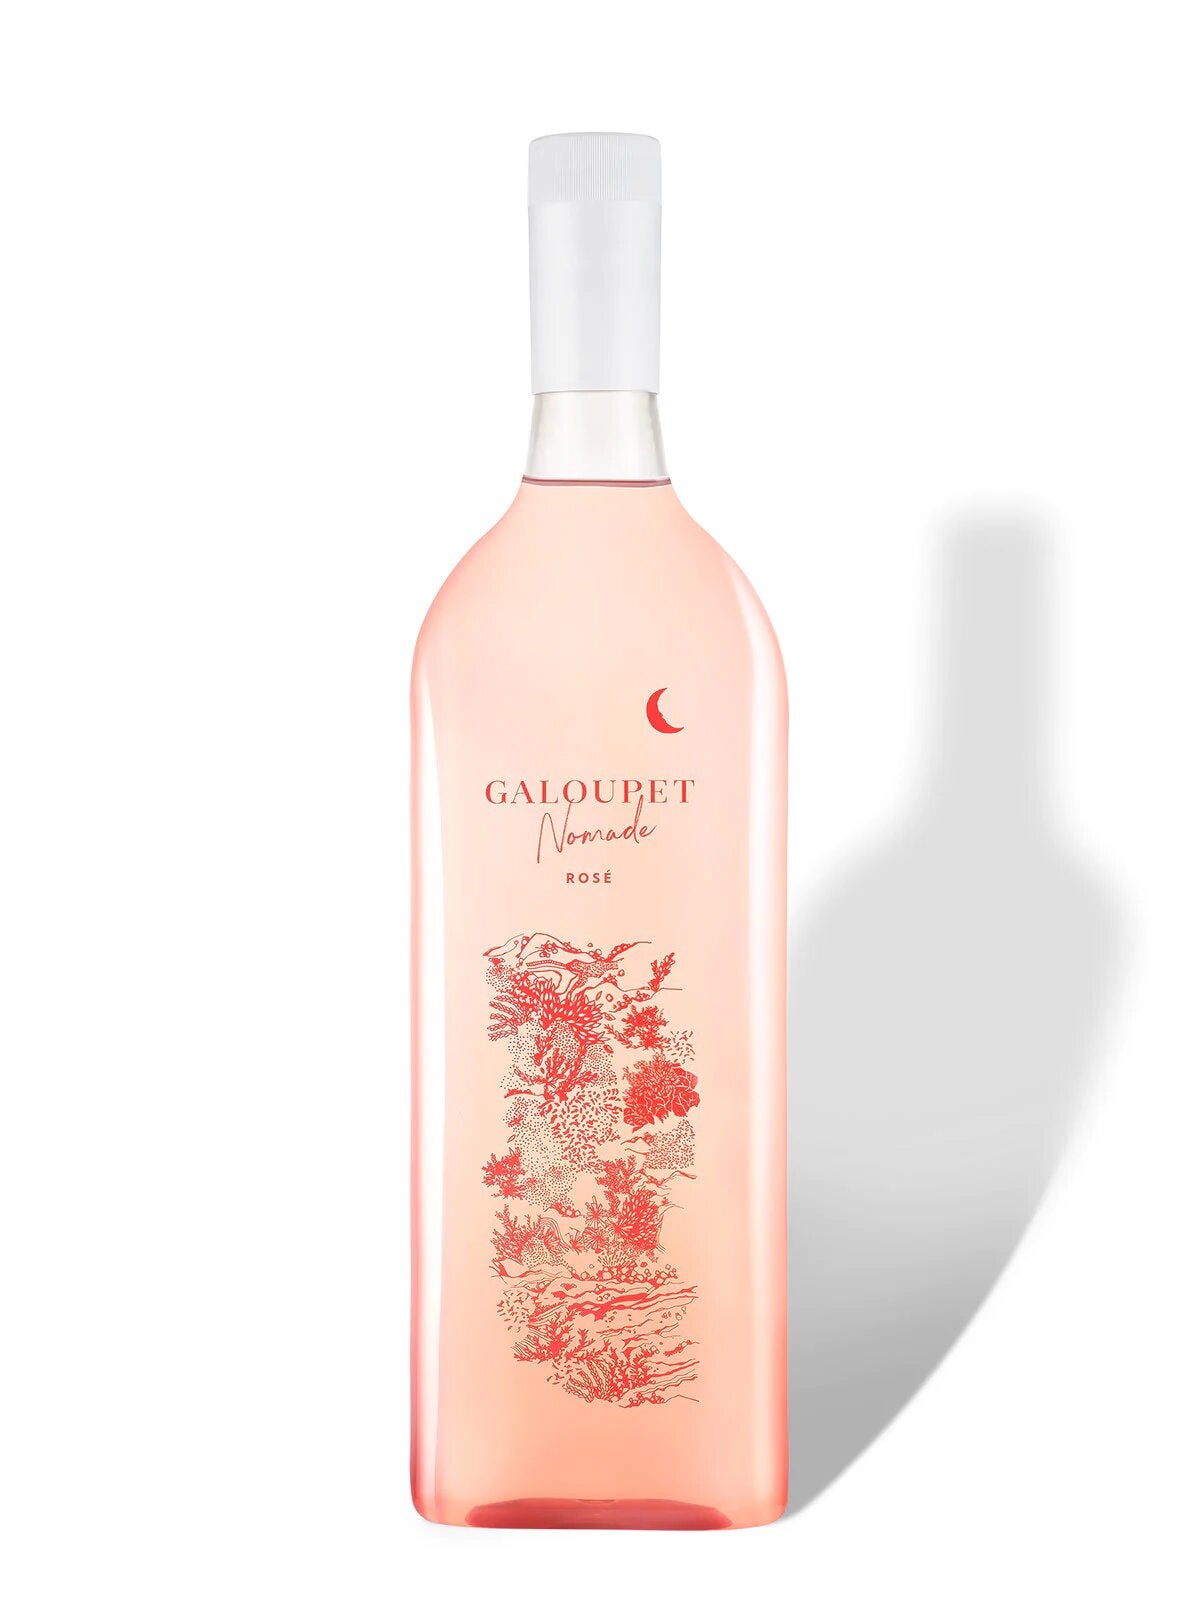 Chateau Galoupet Brand Overview & Buy Wine Same Day Delivery